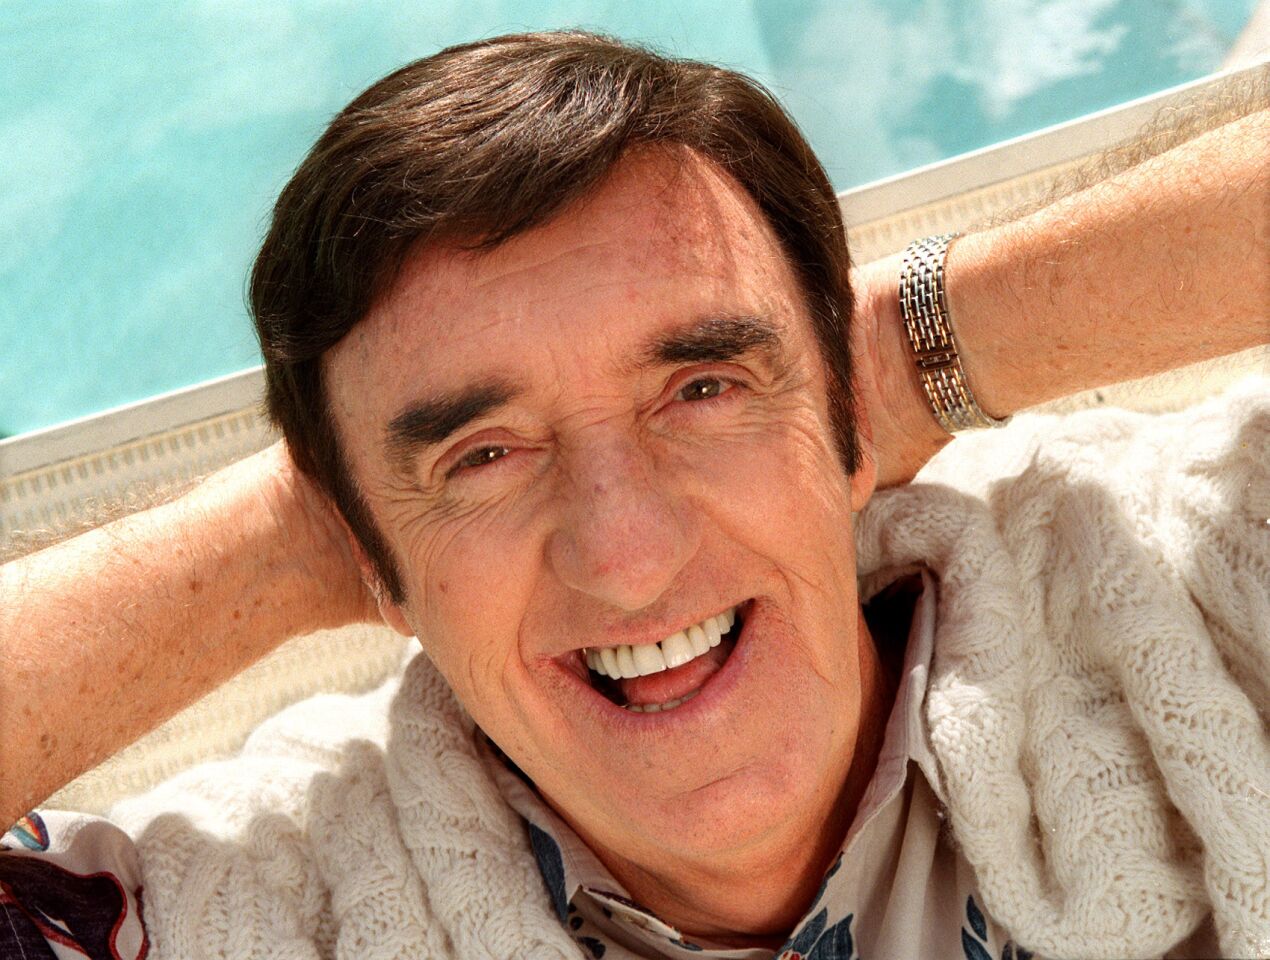 Well, gawwwly! "Gomer Pyle, USMC" and "The Andy Griffith Show" star Jim Nabors married his longtime partner, Stan Cadwallader, in Seattle in January. The relationship was never a secret, but the sitcom star had not come out publicly before.